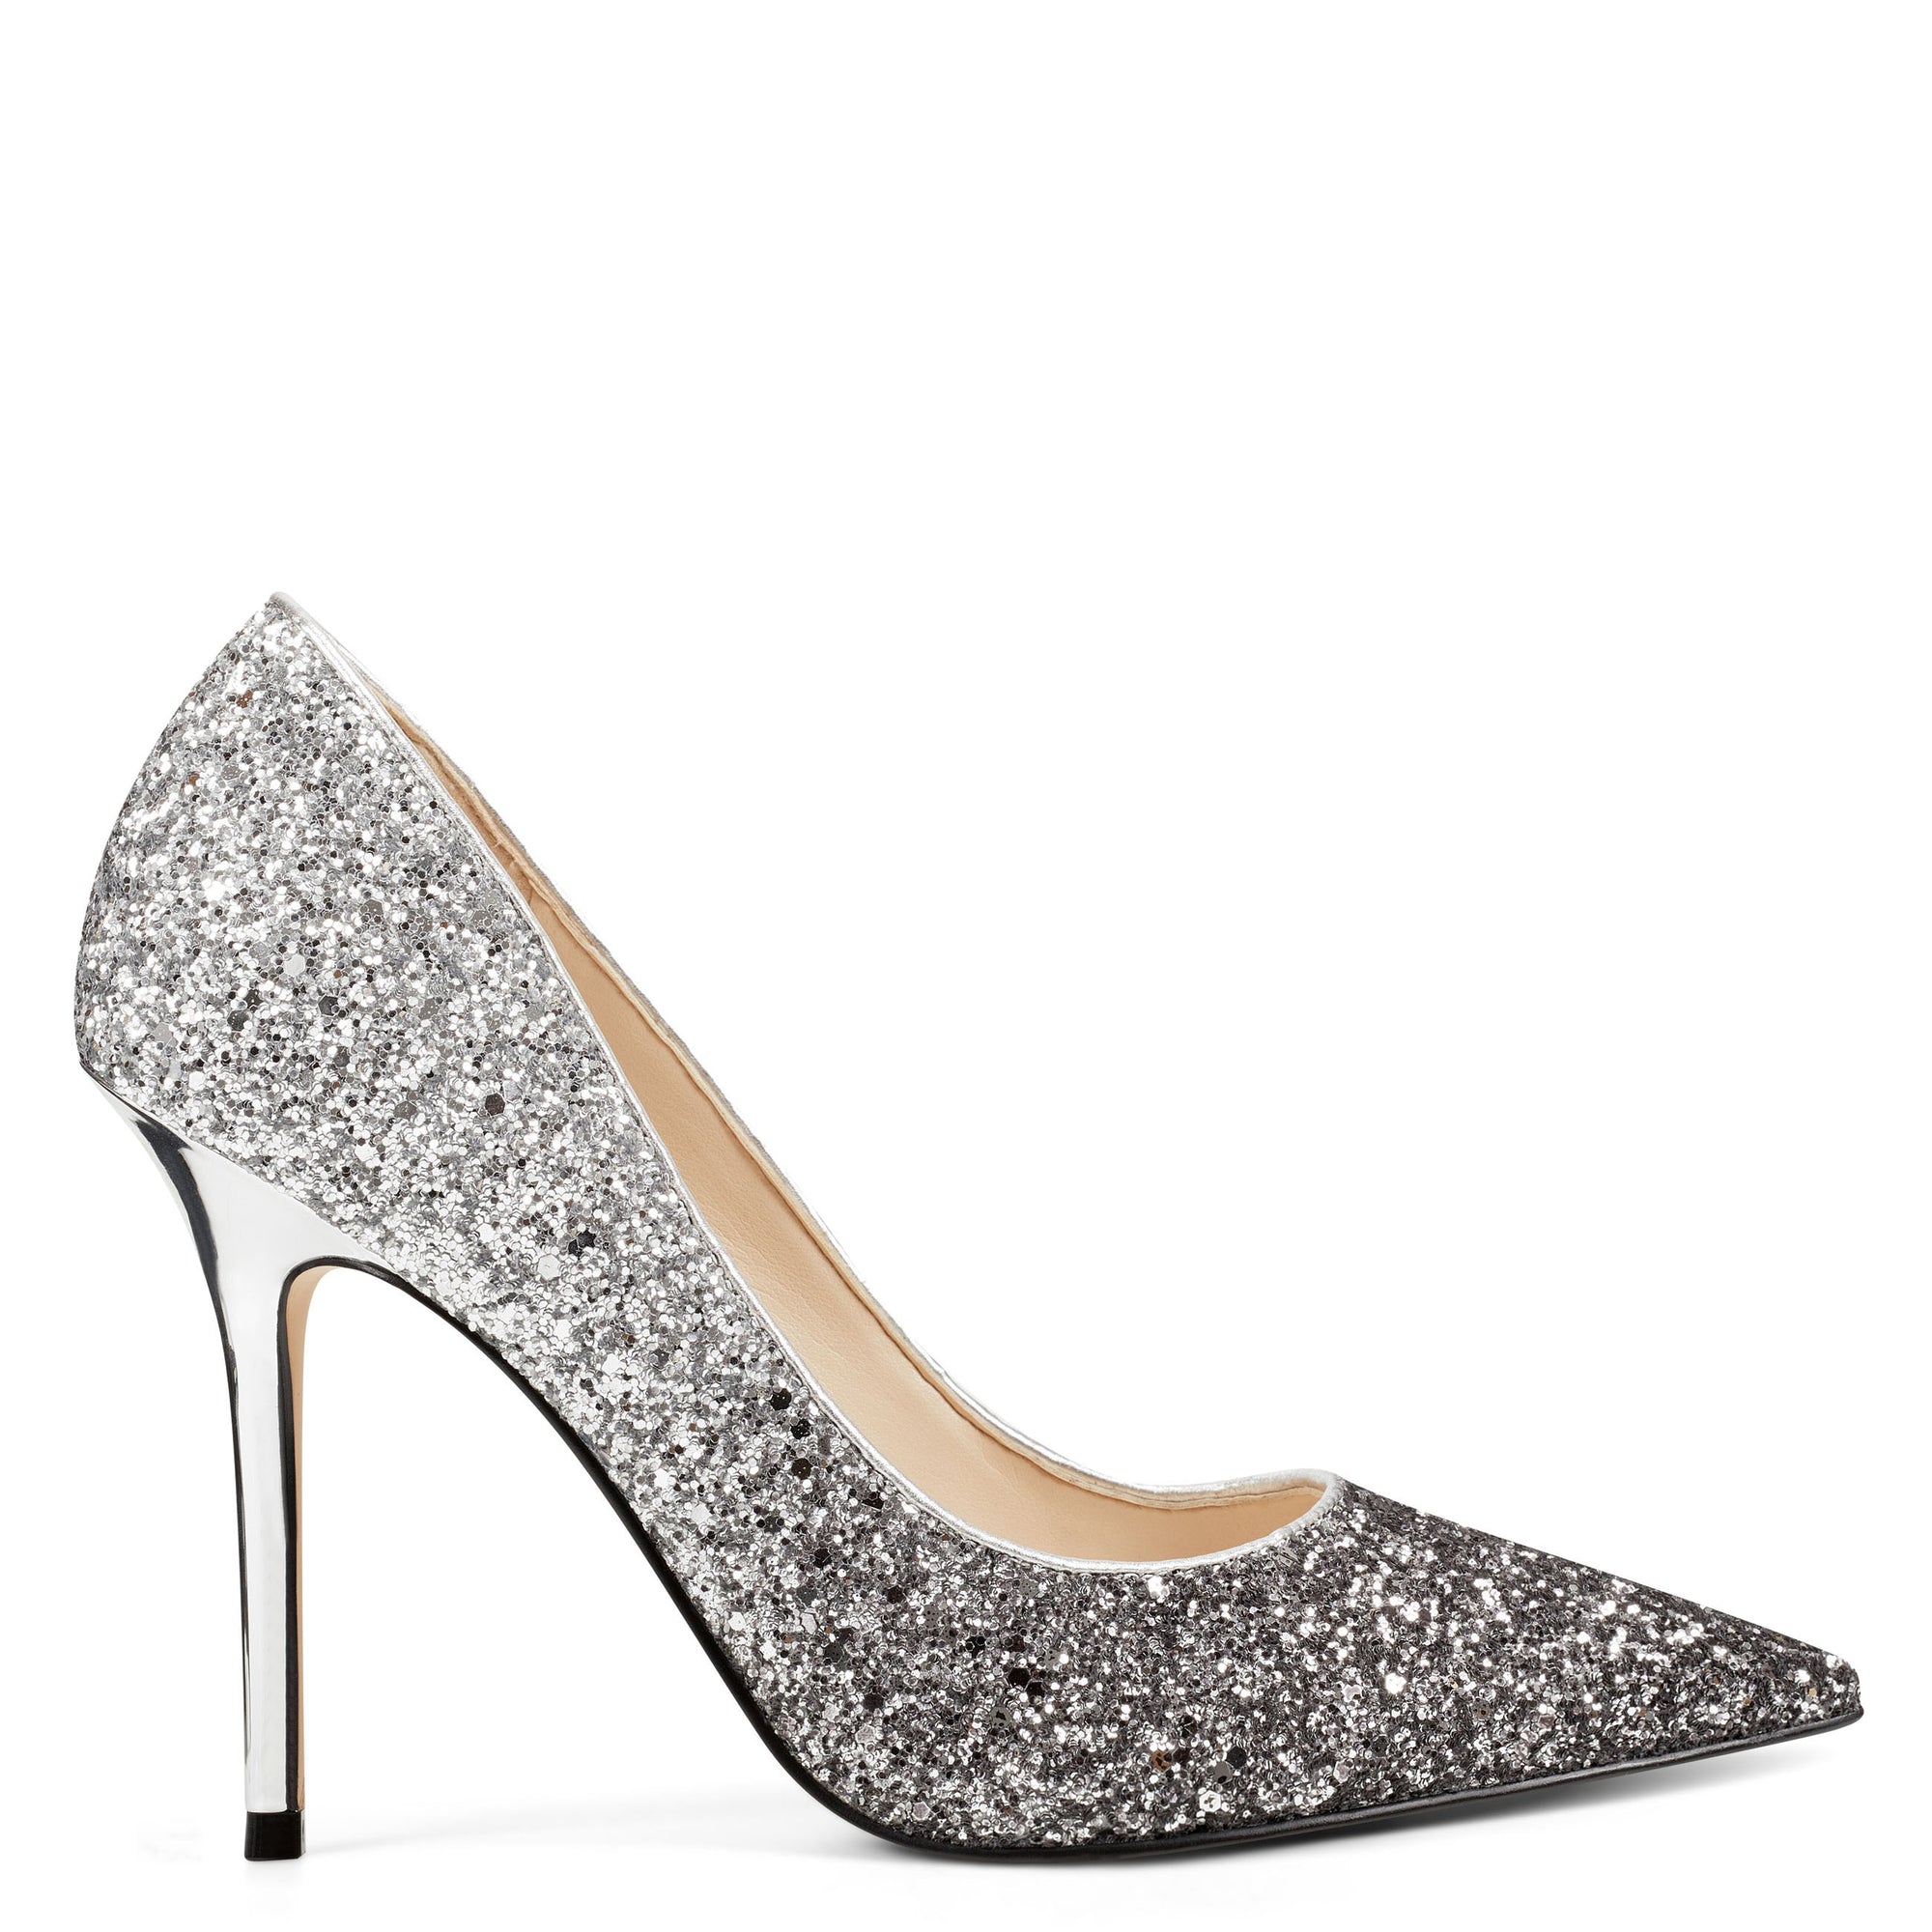 Bliss pointy toe pump - Nine West